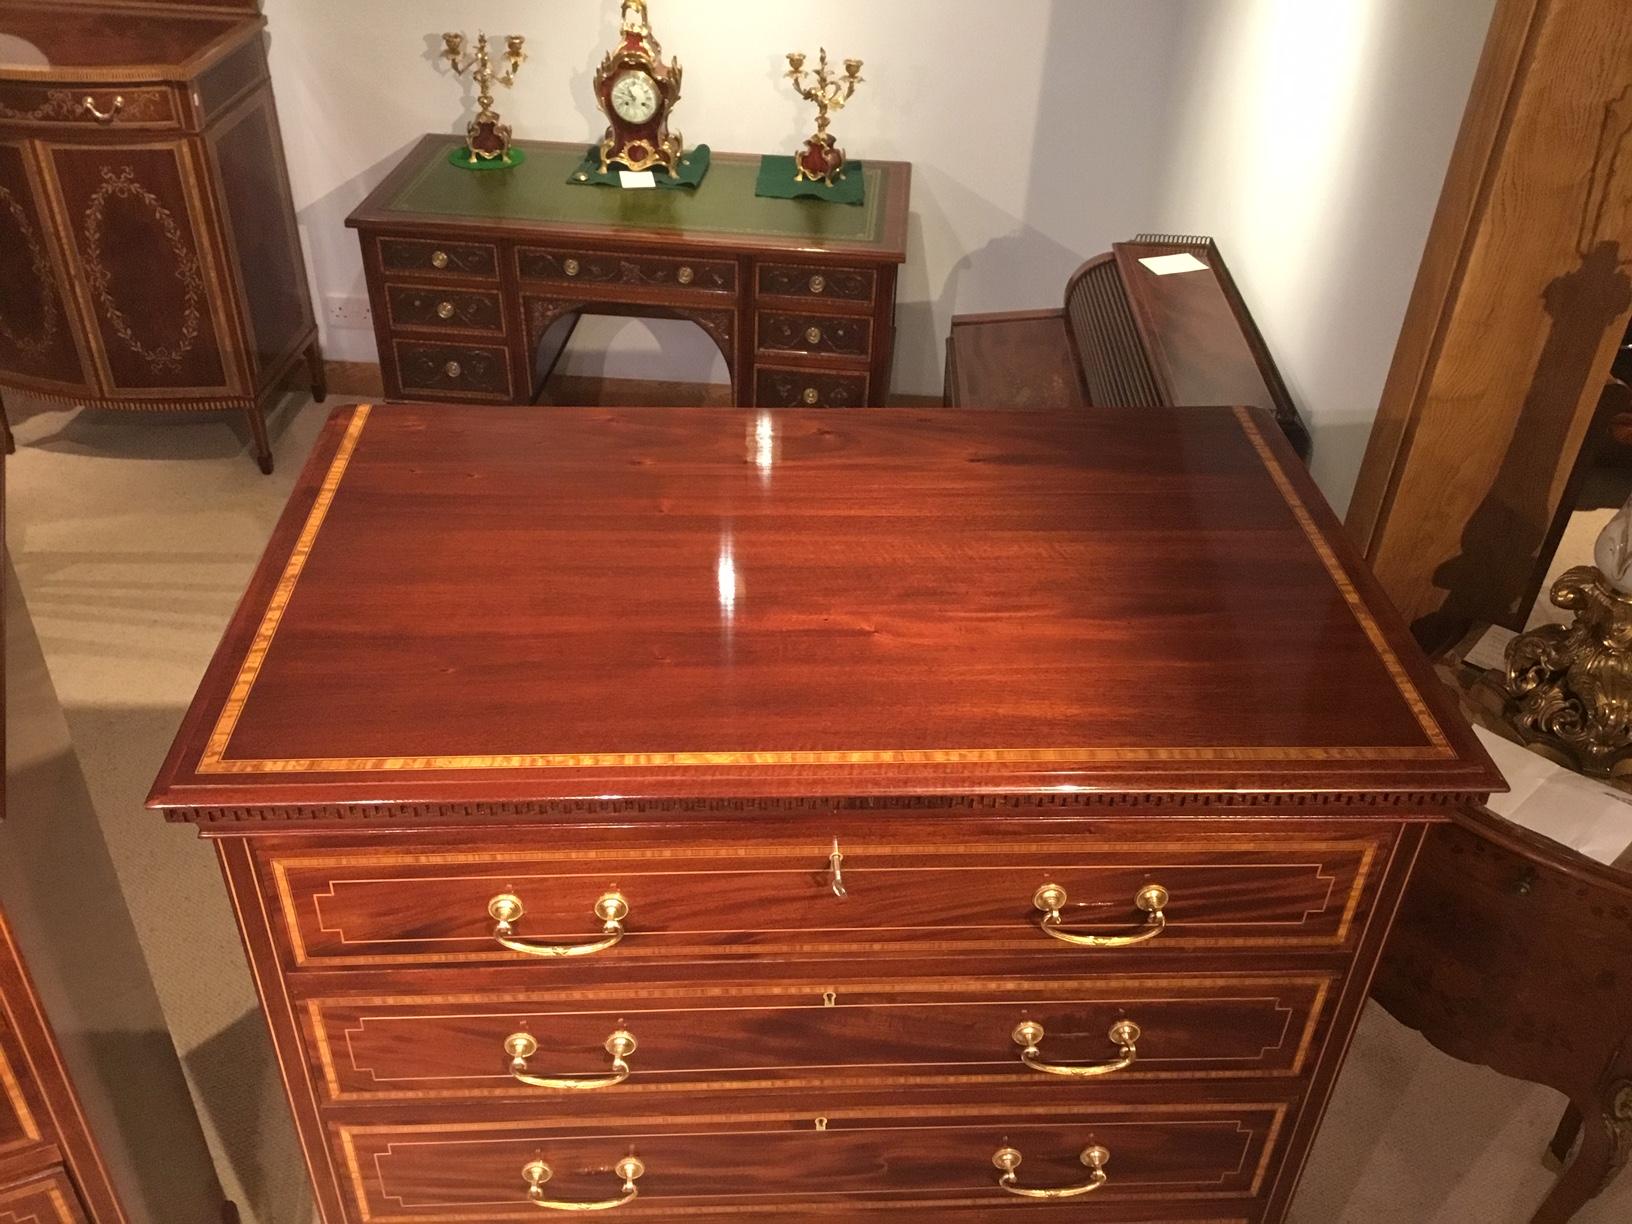 Superb Quality Pair of Edwardian Period Mahogany Inlaid Chests For Sale 2